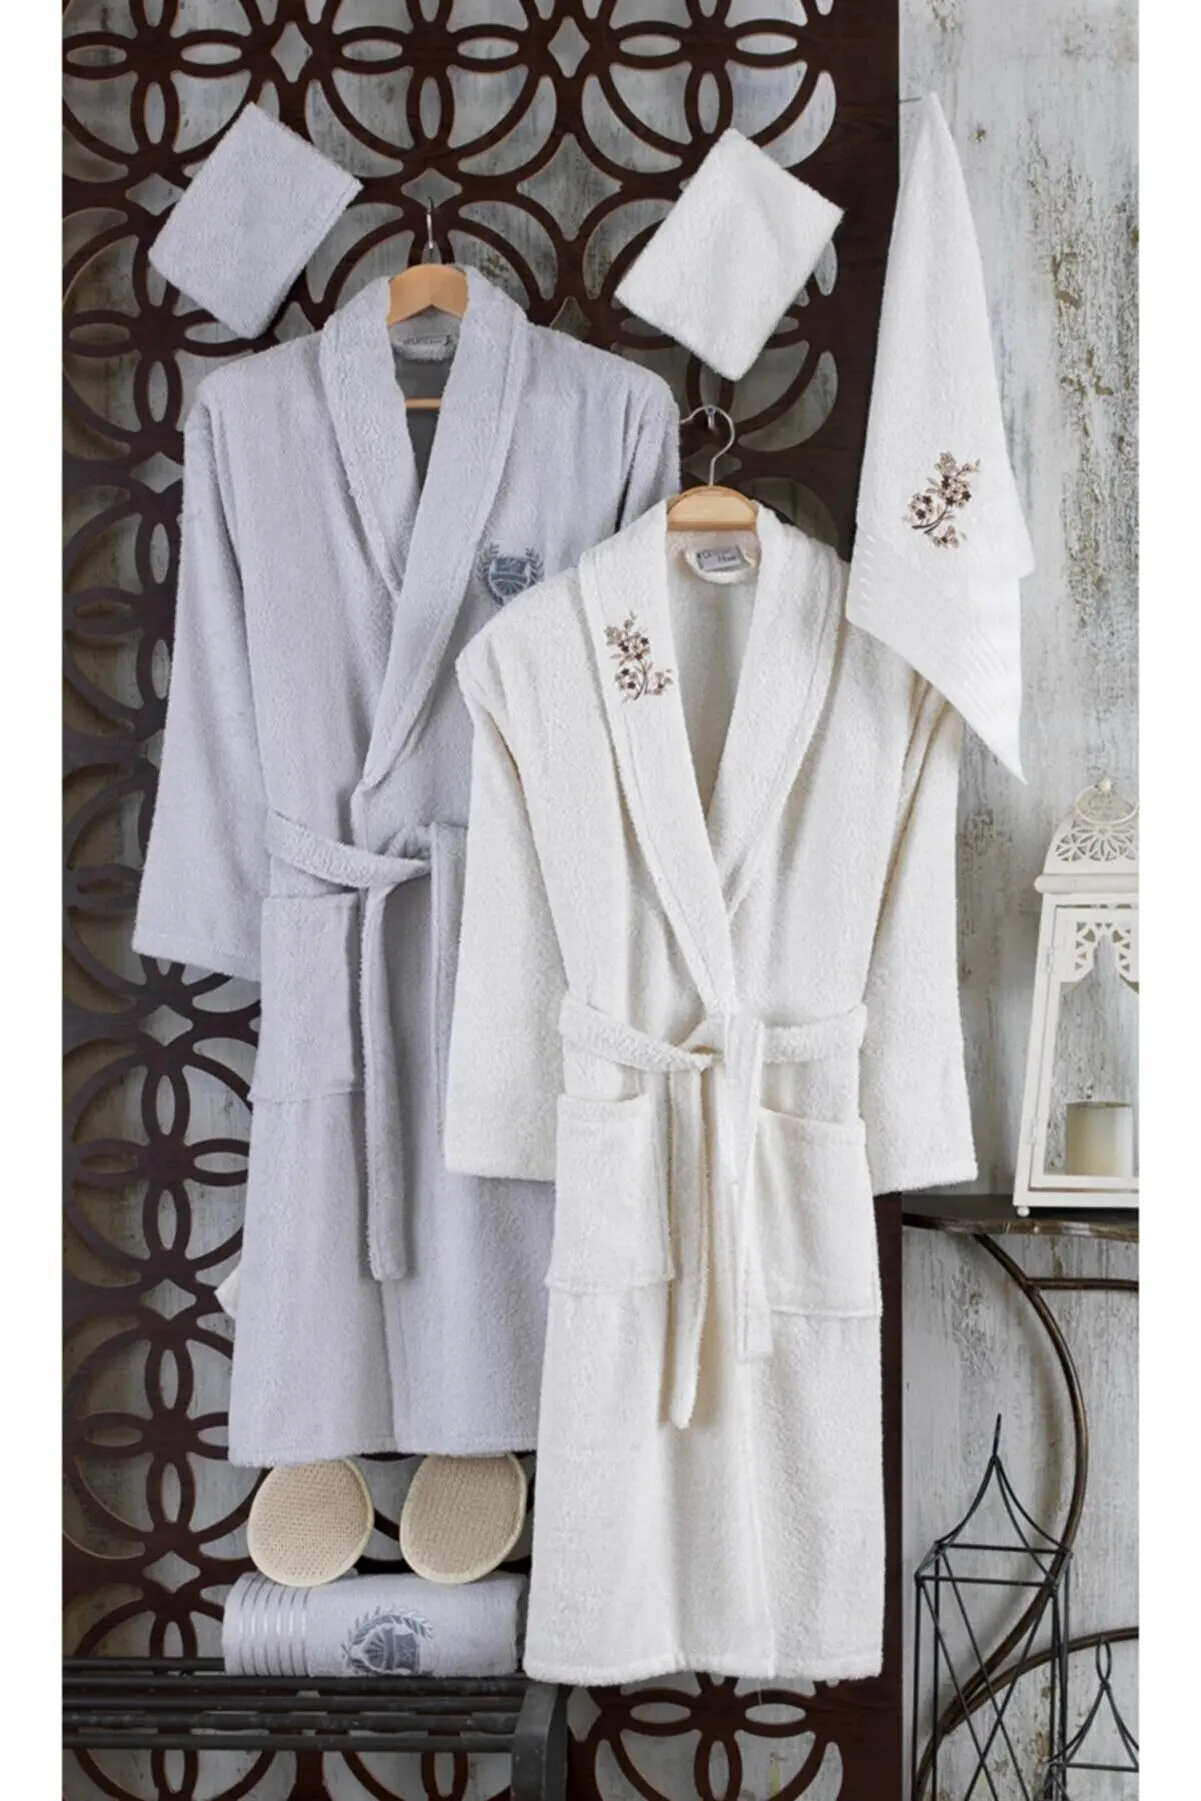 100% cotton soft, highly absorbent, high quality 10 Piece Embroidered Bathrobe Set